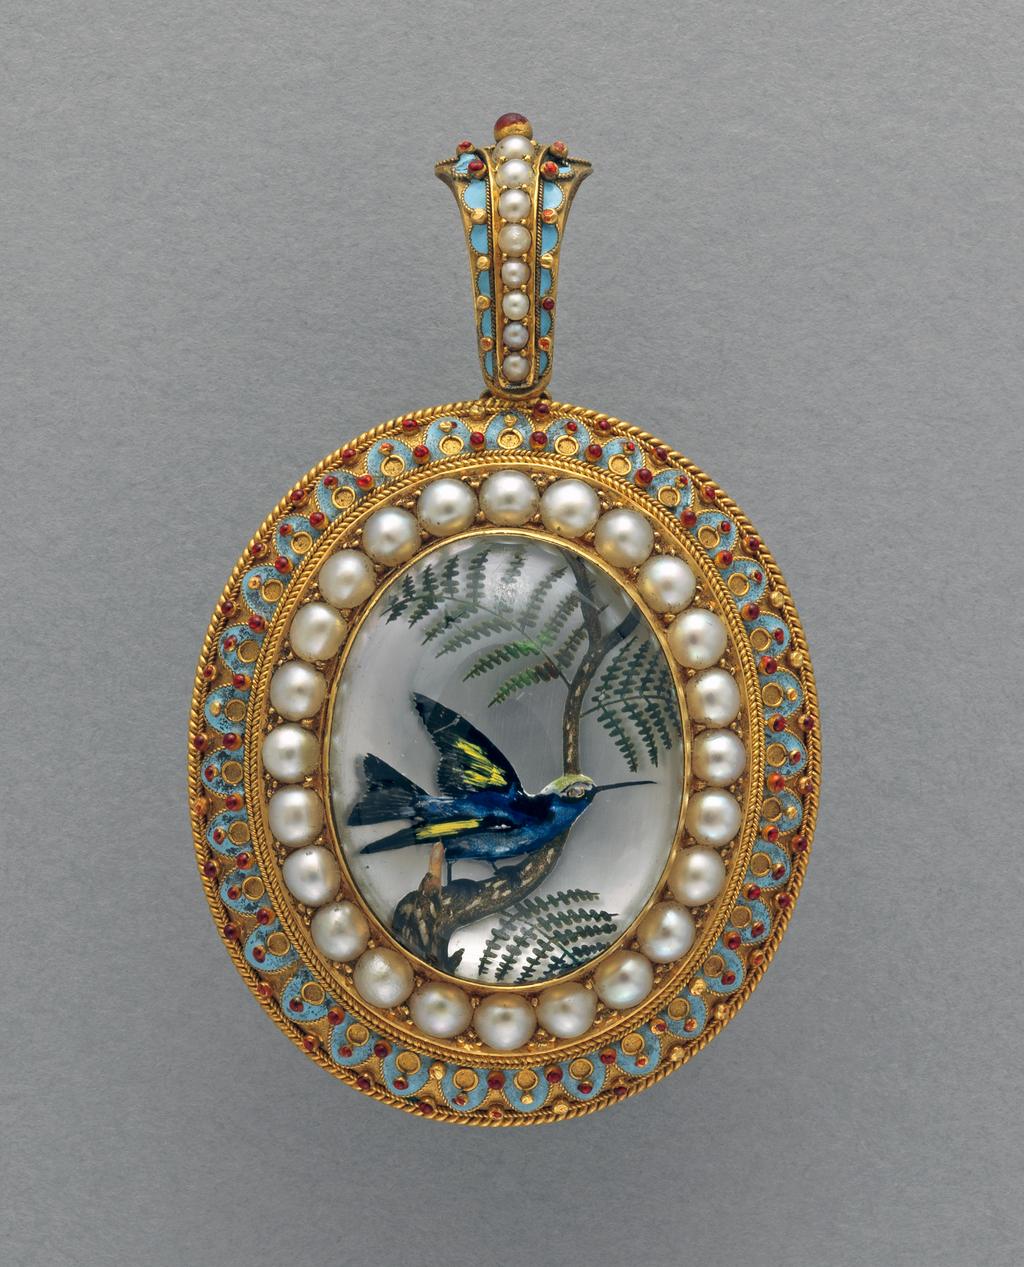 An image of Thomas, William James. Reverse crystal intaglio of a bird on a branch mounted in gold, enamelled in pale blue and red and set with pearls. Oval with a loop for suspension at the top, decorated en suite with the mount. Behind the intaglio there is a compartment for a phototgraph or hair. The back of the mount is engraved with the word 'Vienna' and the date '1873'.